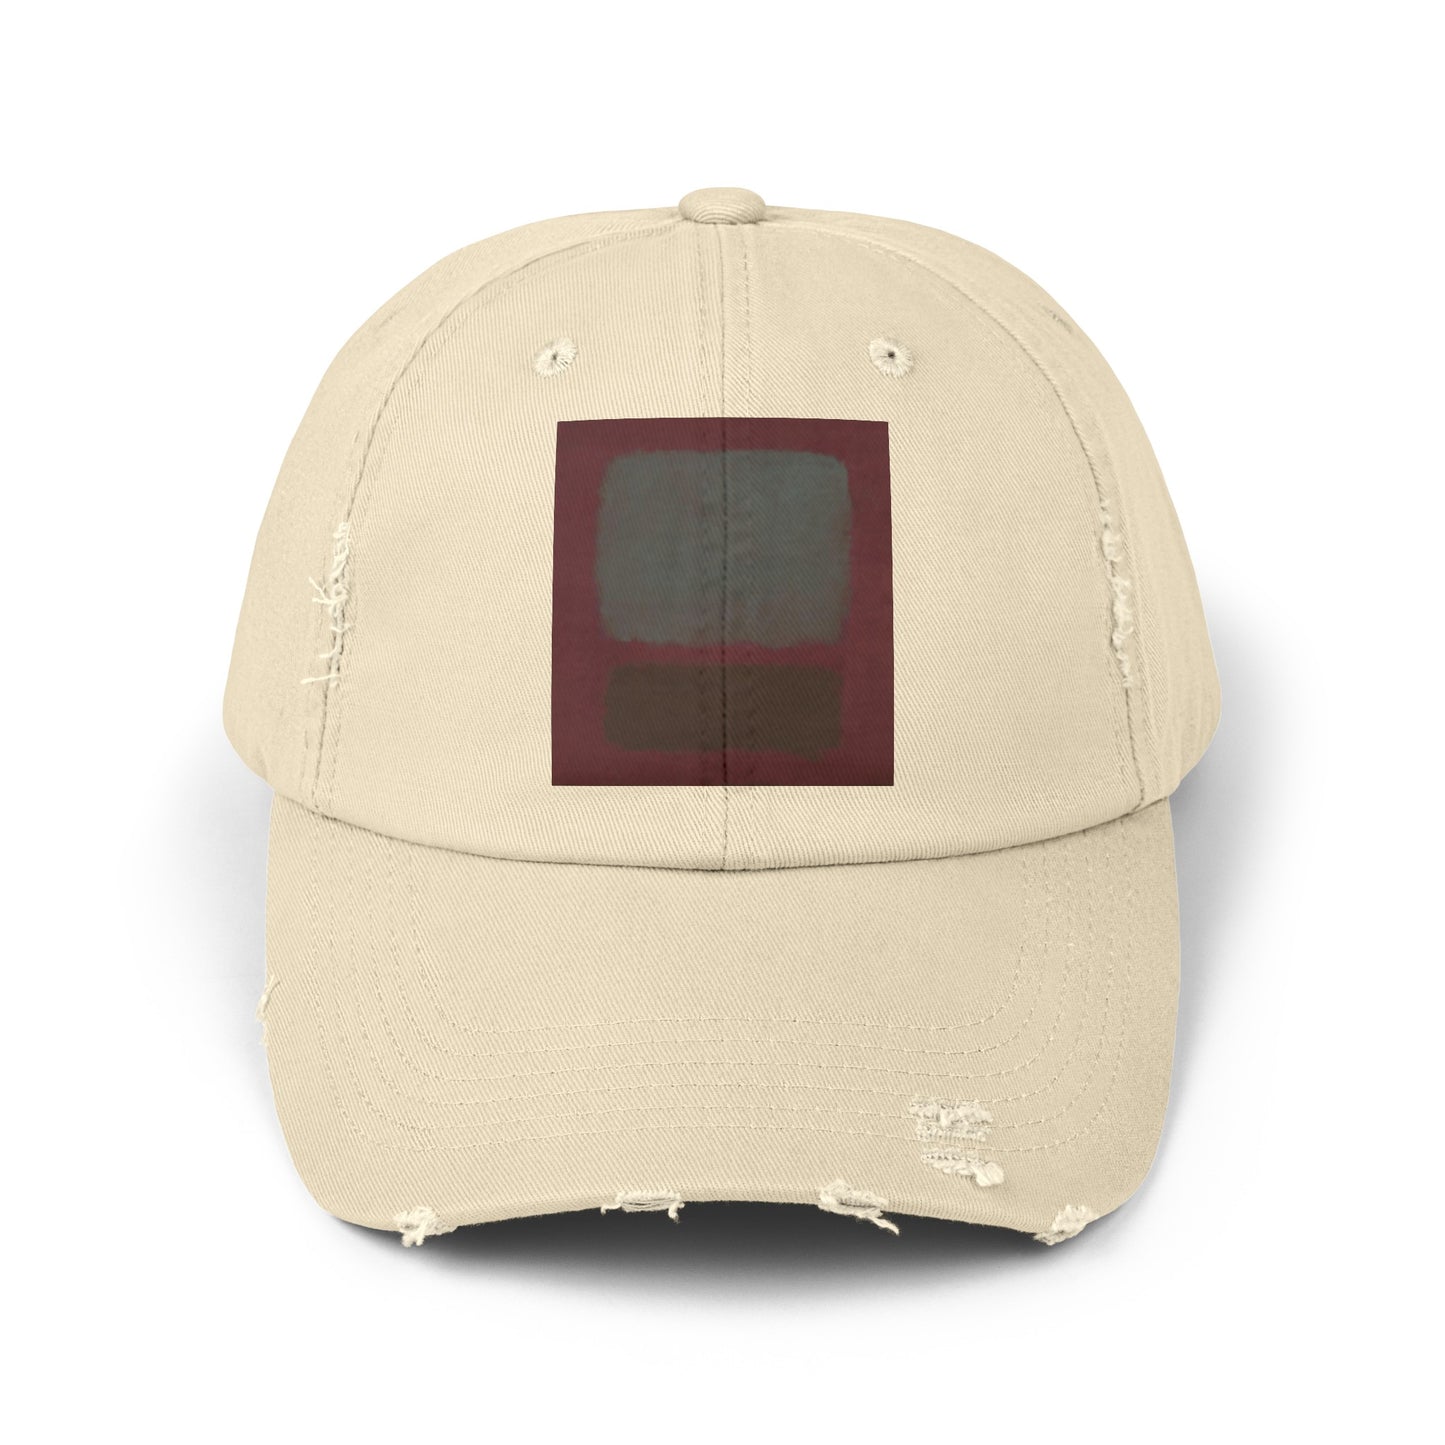 a white hat with a red square on it